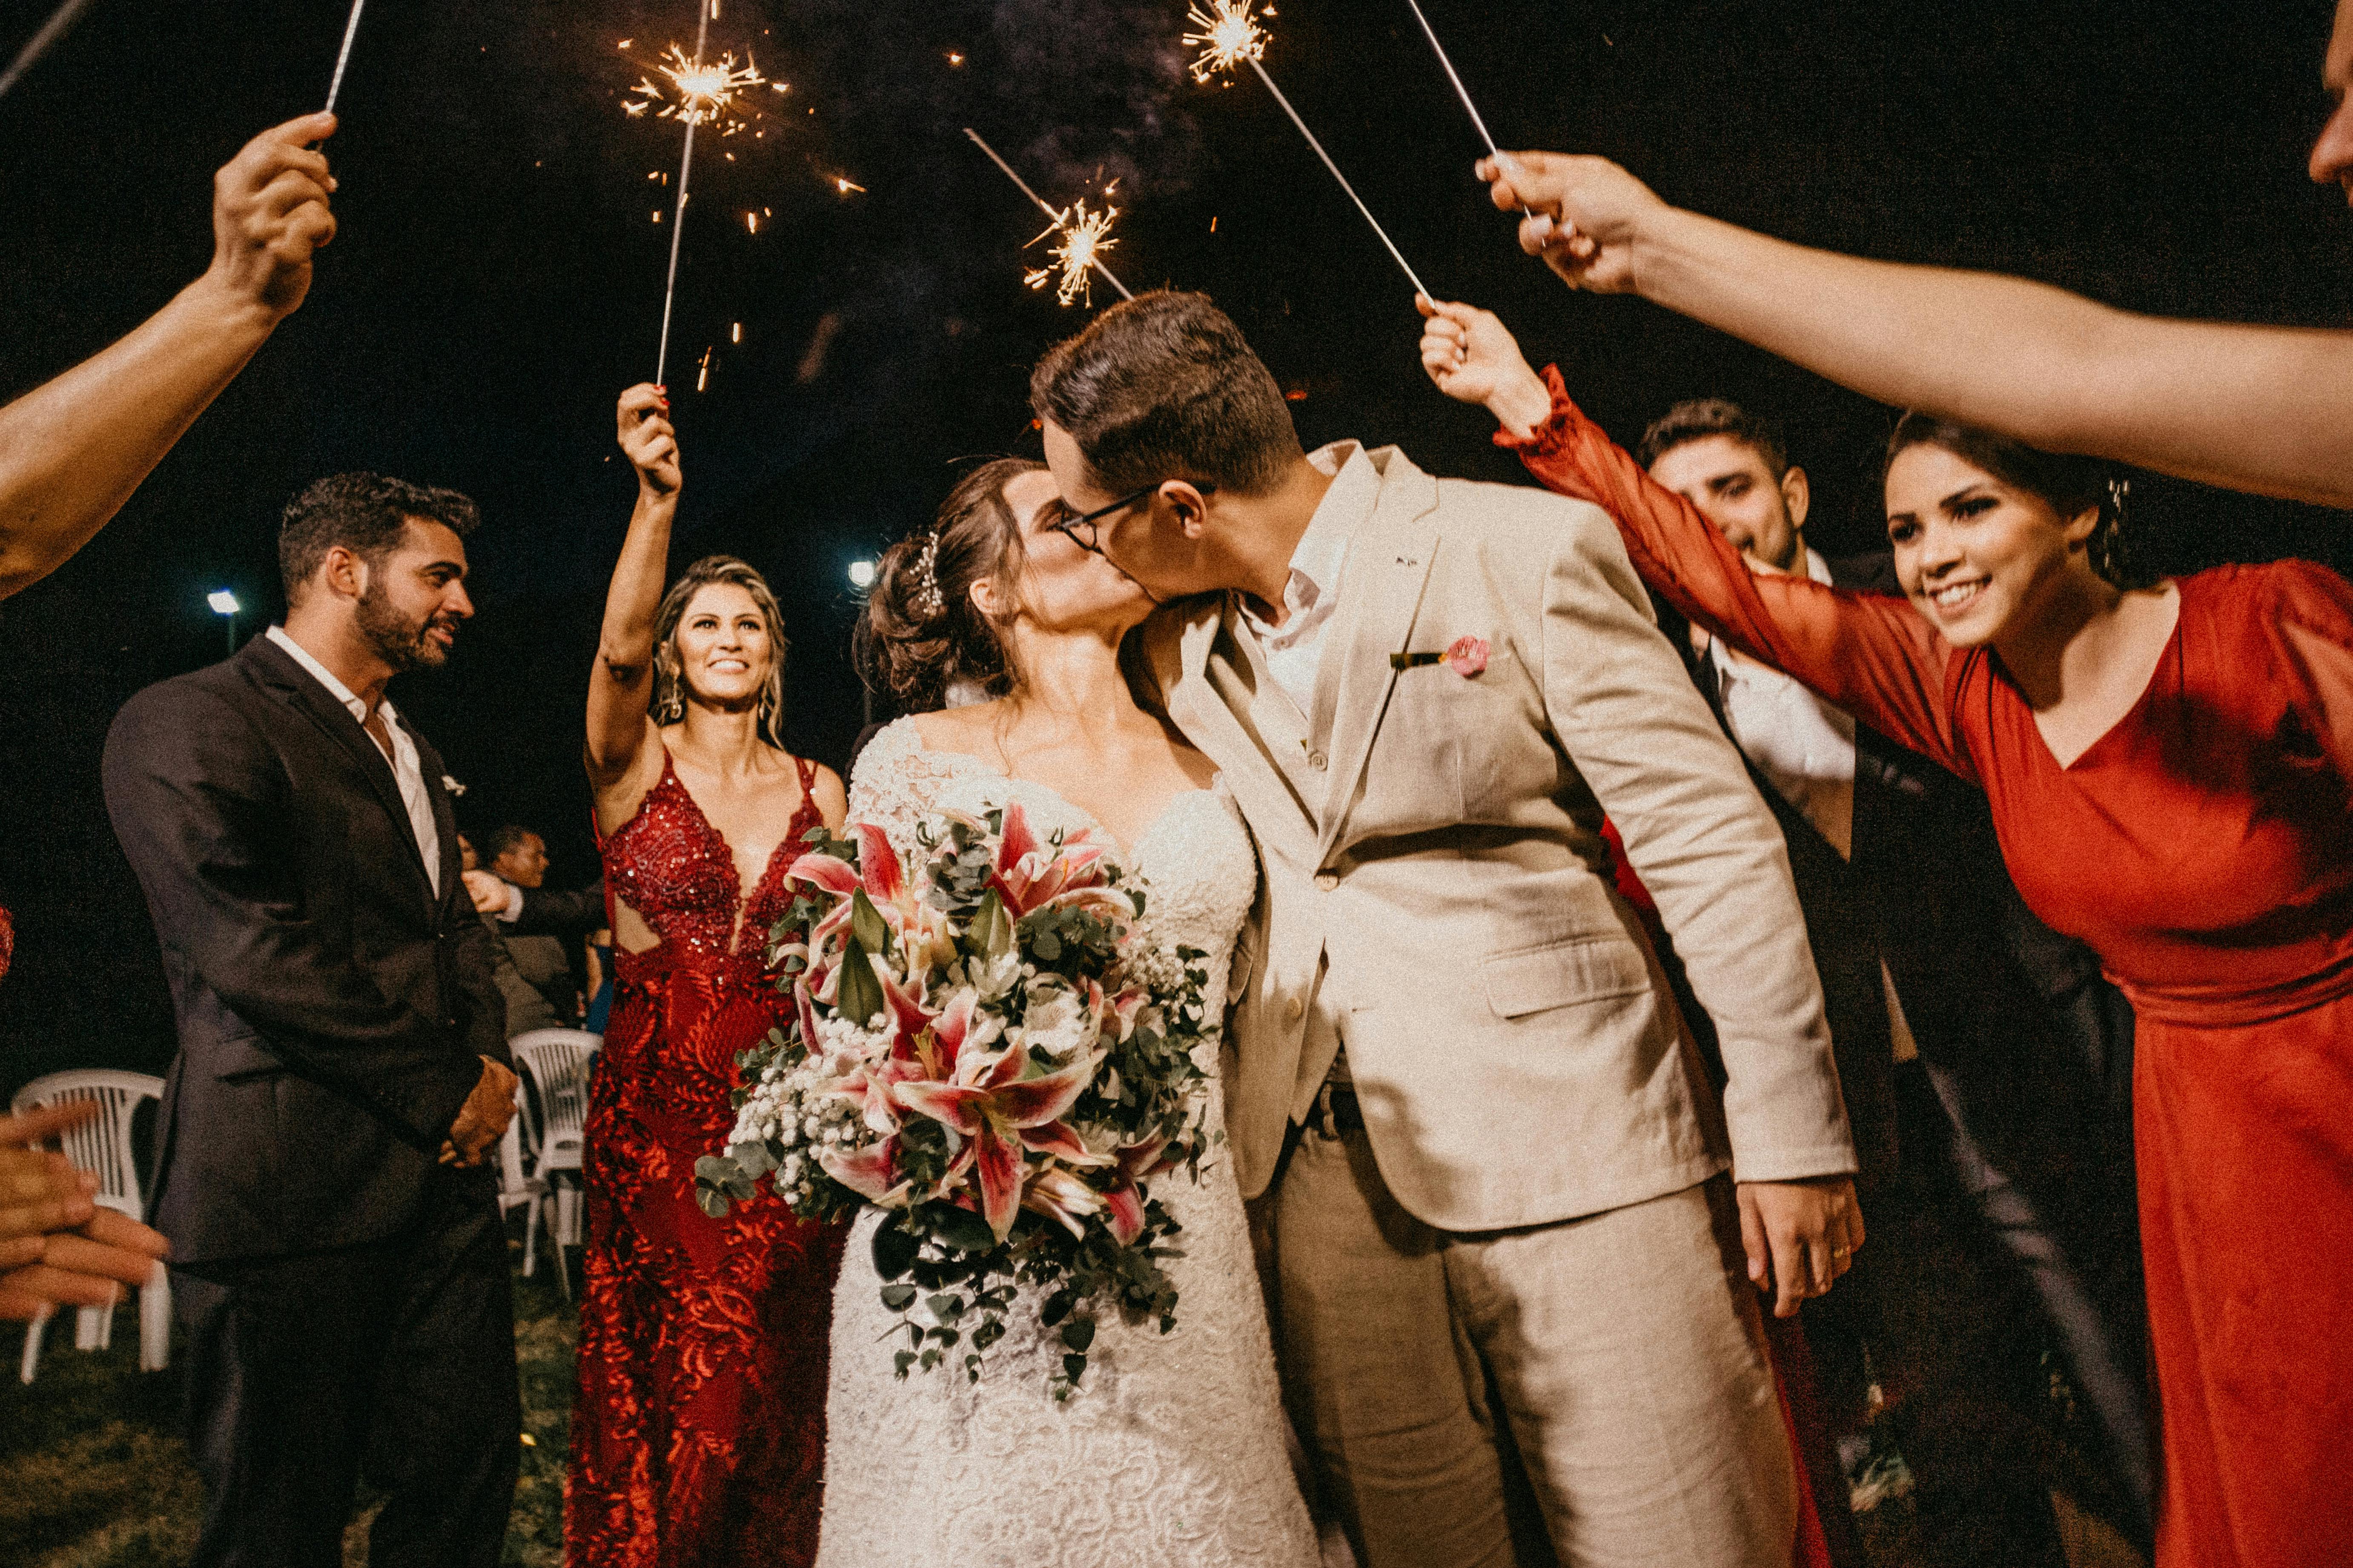 A couple kissing while being celebrated by family members | Source: Pexels